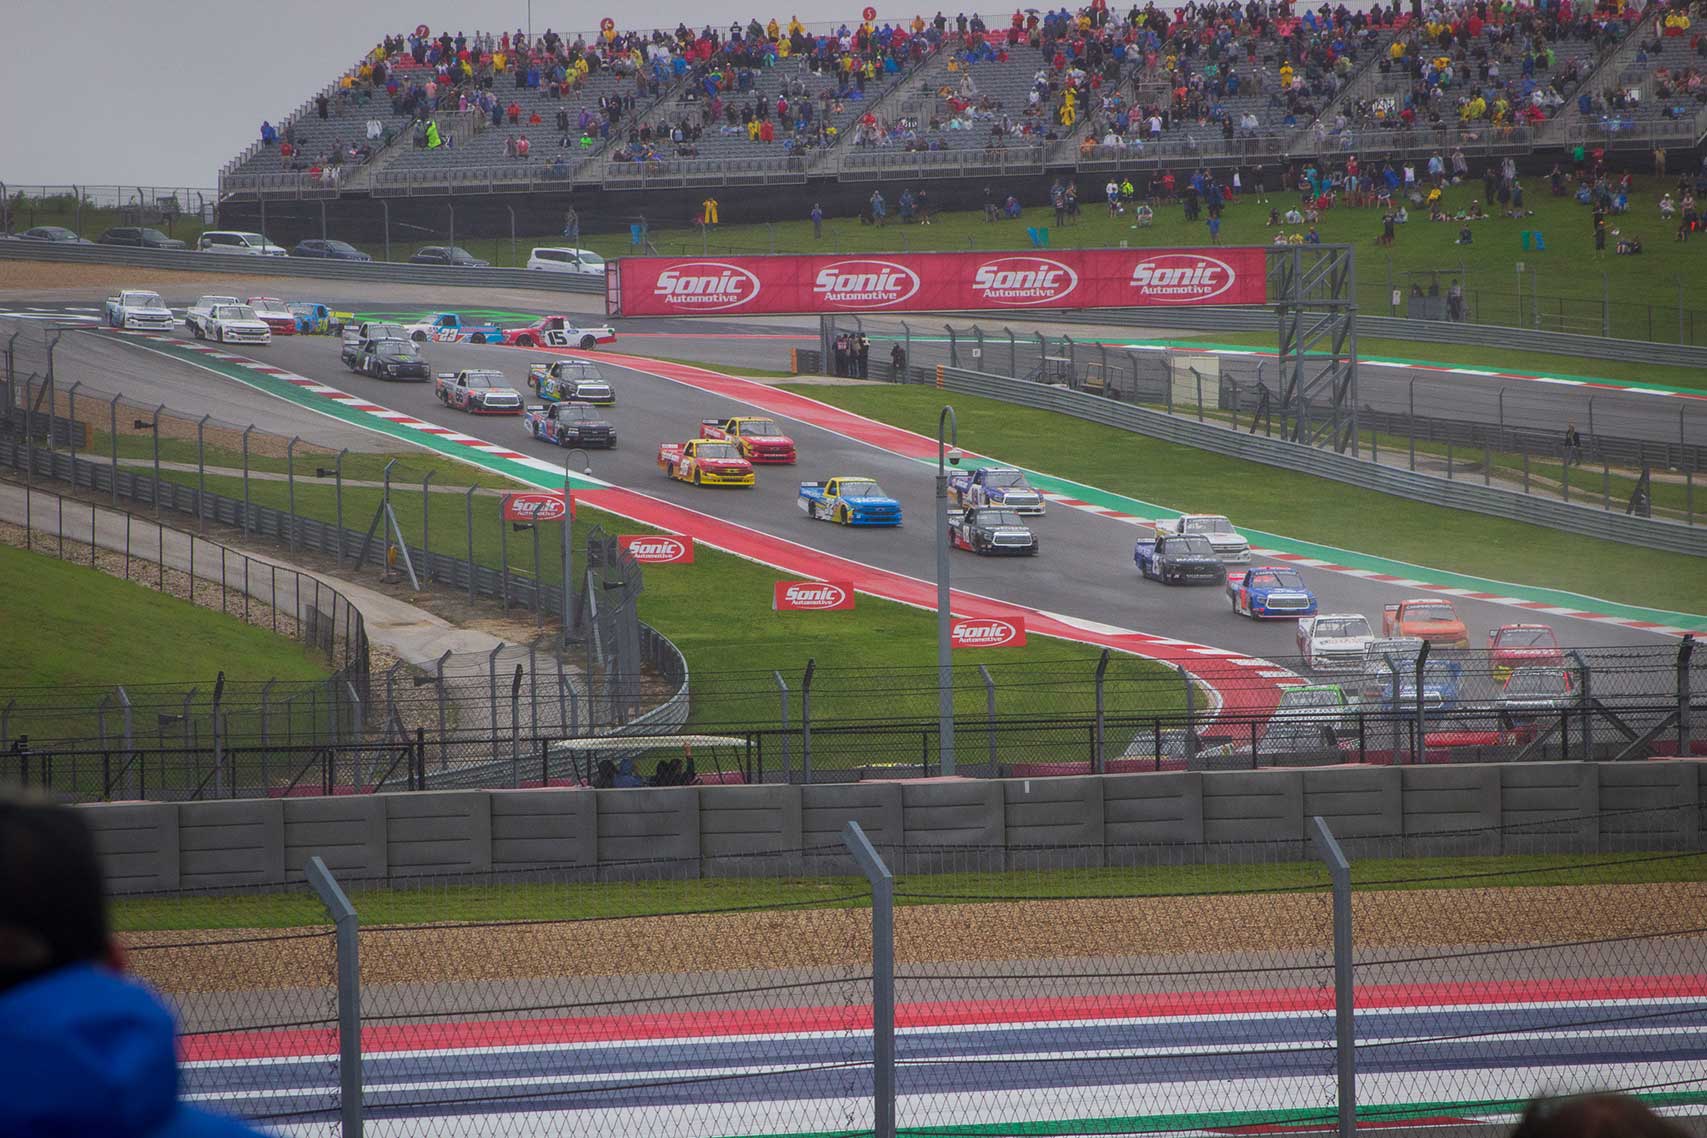 Racing trucks racing on a wet road course